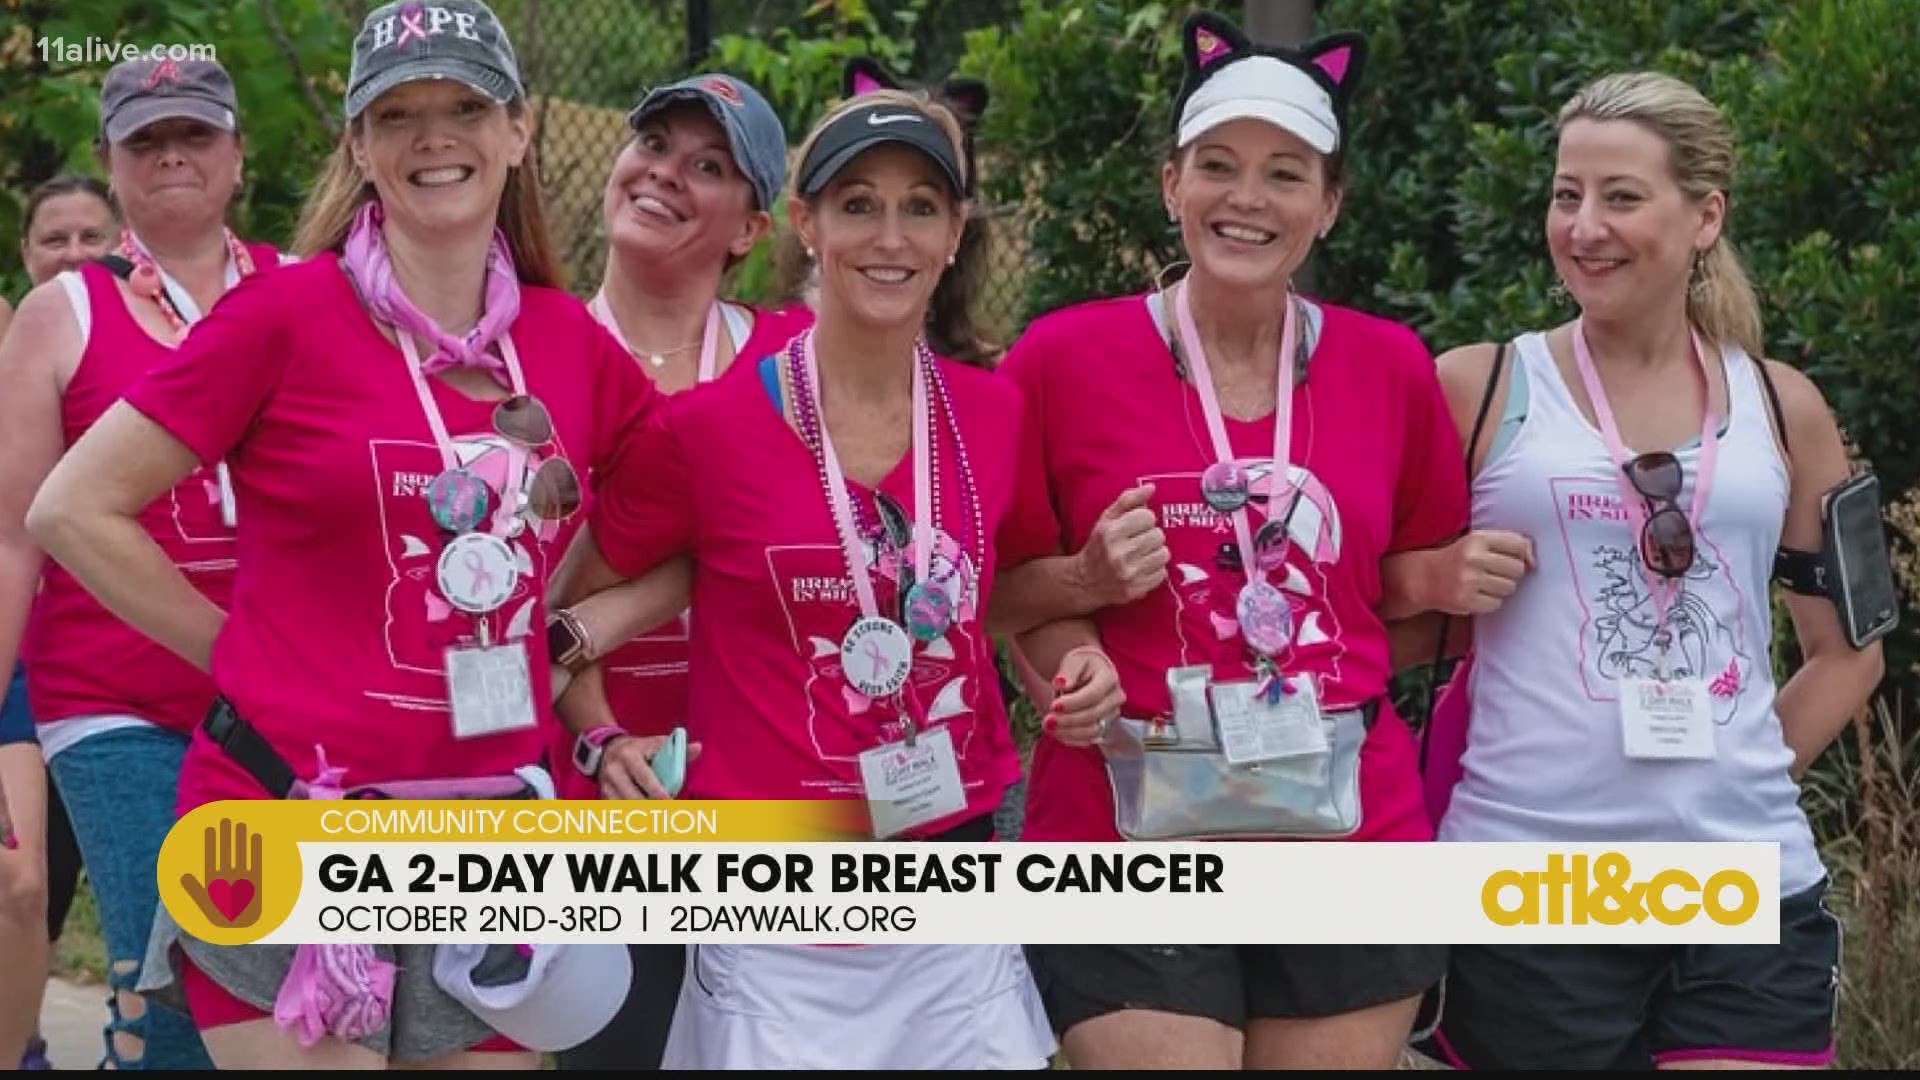 More than 10,000 Georgians are diagnosed with breast cancer every year. Learn about the GA 2-Day Walk for Breast Cancer & other local events in Community Connection.